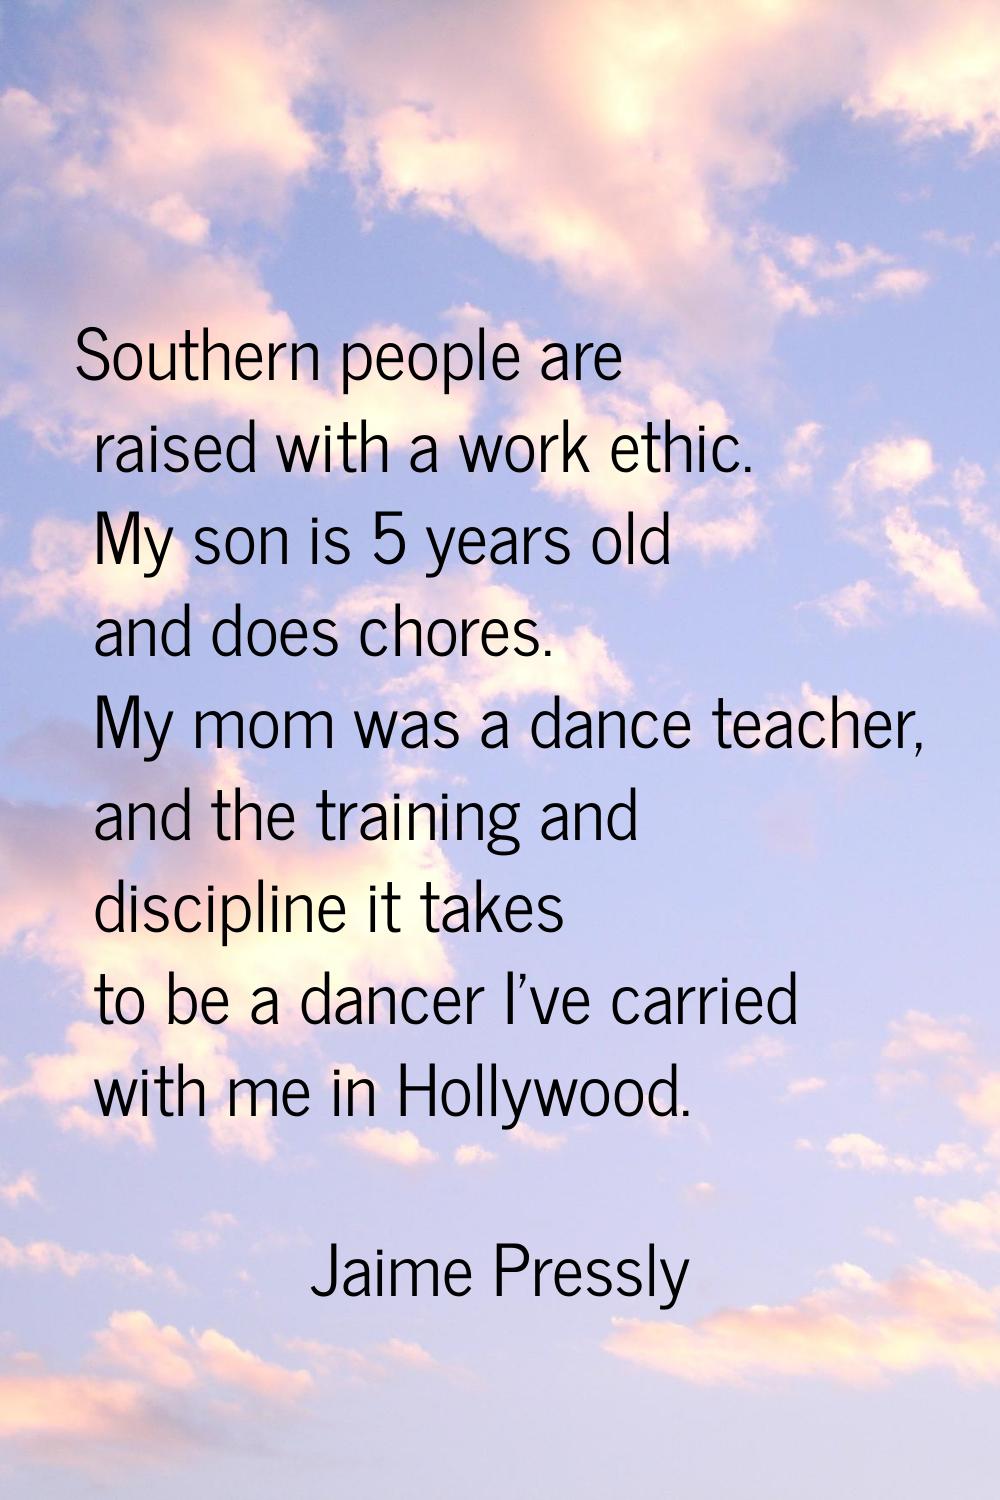 Southern people are raised with a work ethic. My son is 5 years old and does chores. My mom was a d